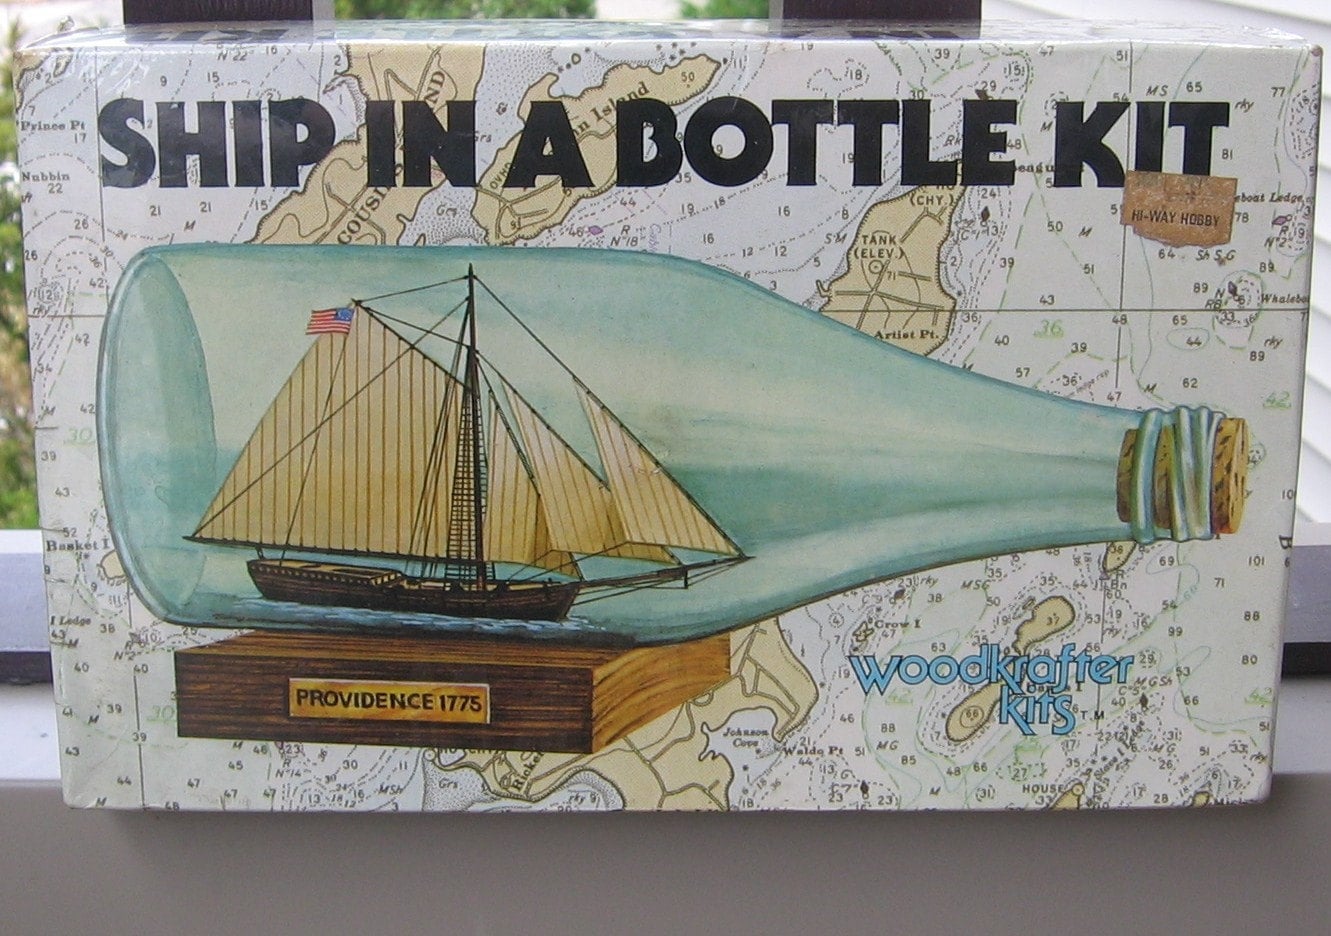 1980 ship in a bottle kit from woodkrafter kits factory